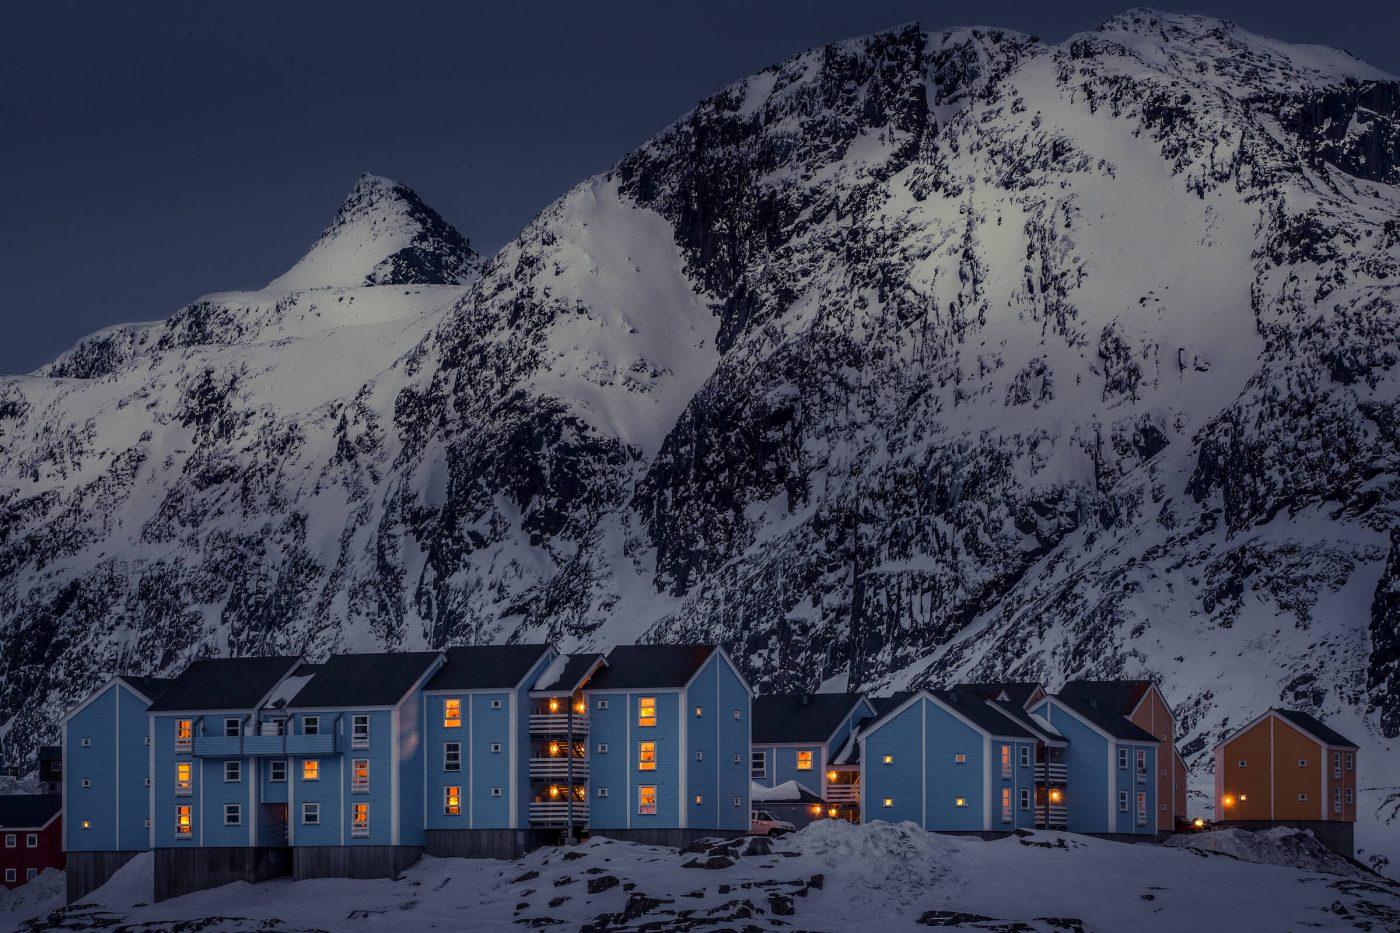 A part of the Kussangasoq neighbourhood in Sisimiut with the mountain Nasaasaaq in the background, by Mads Pihl